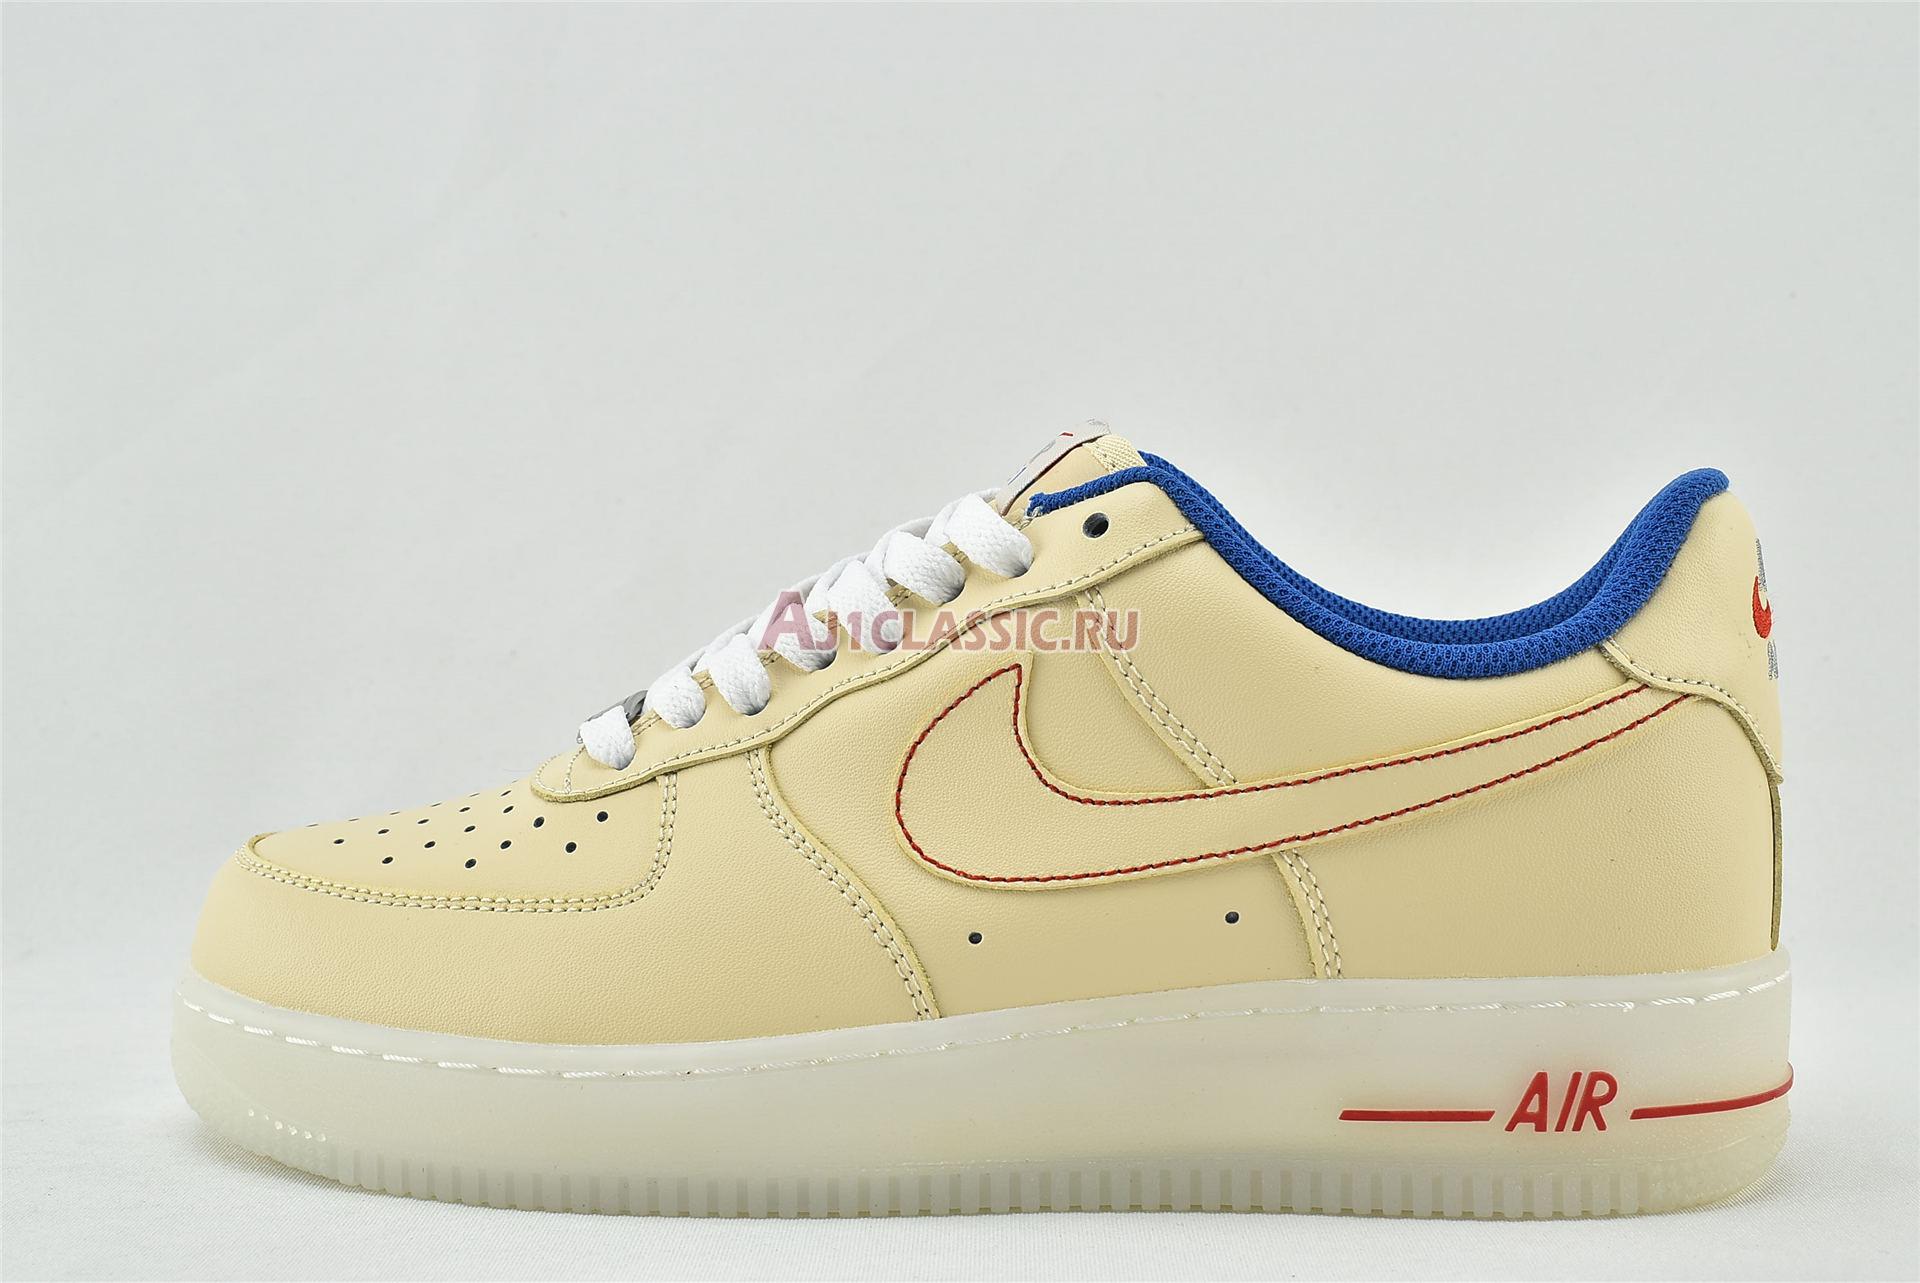 Nike Air Force 1 Low 07 LV8 Ice Sole DH0928-800 Guava Ice/Guava Ice/Game Royal Sneakers